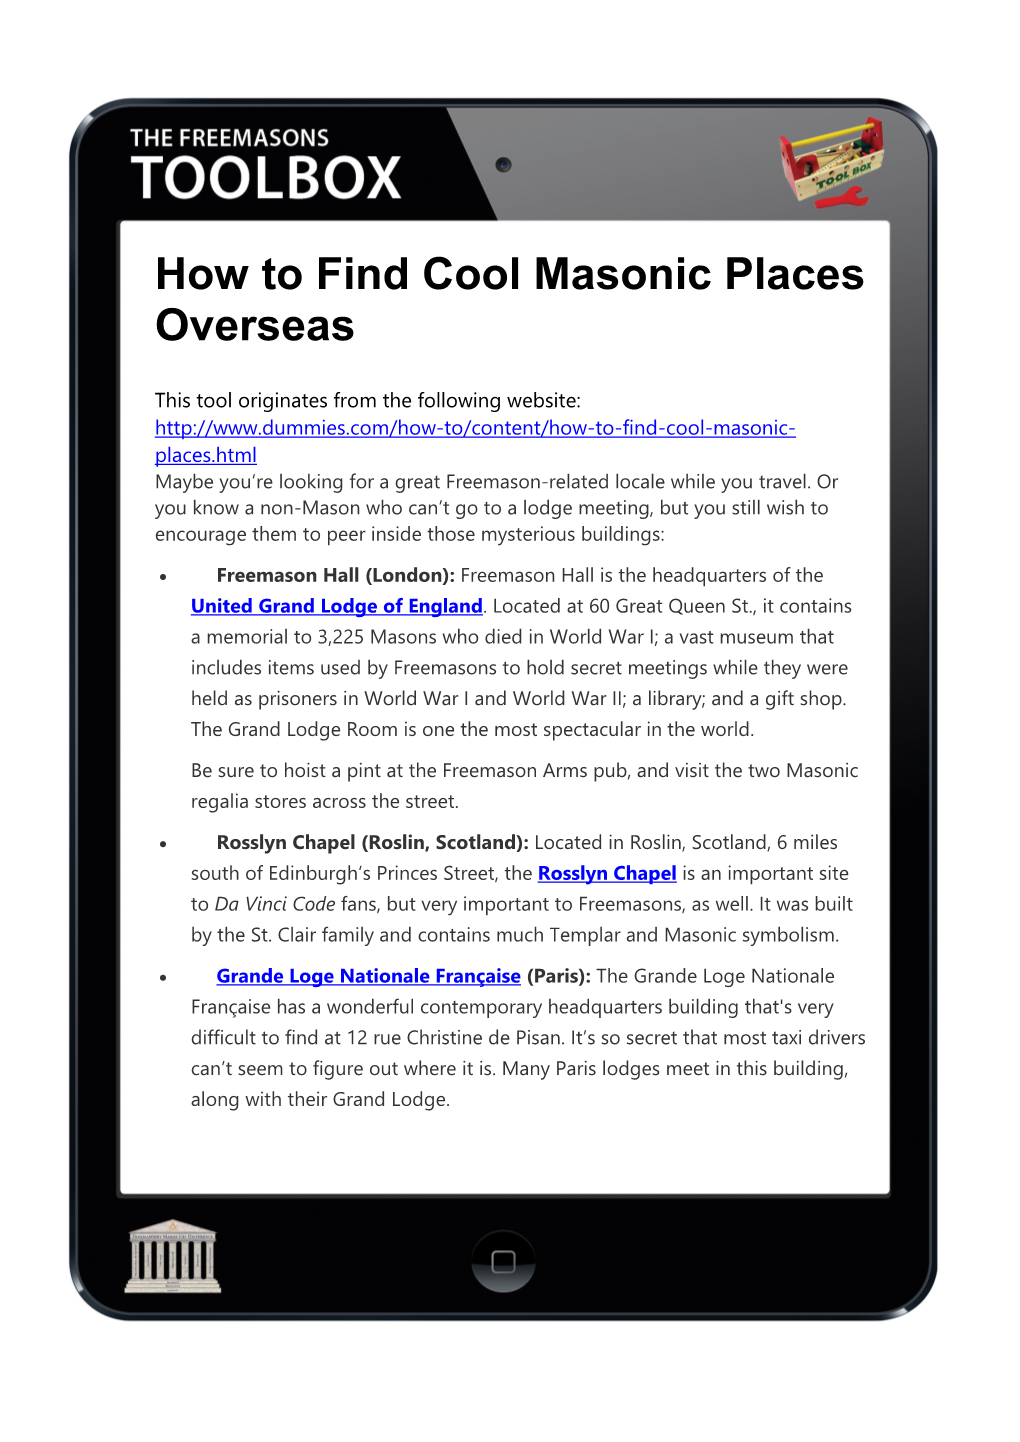 How to Find Cool Masonic Places Overseas